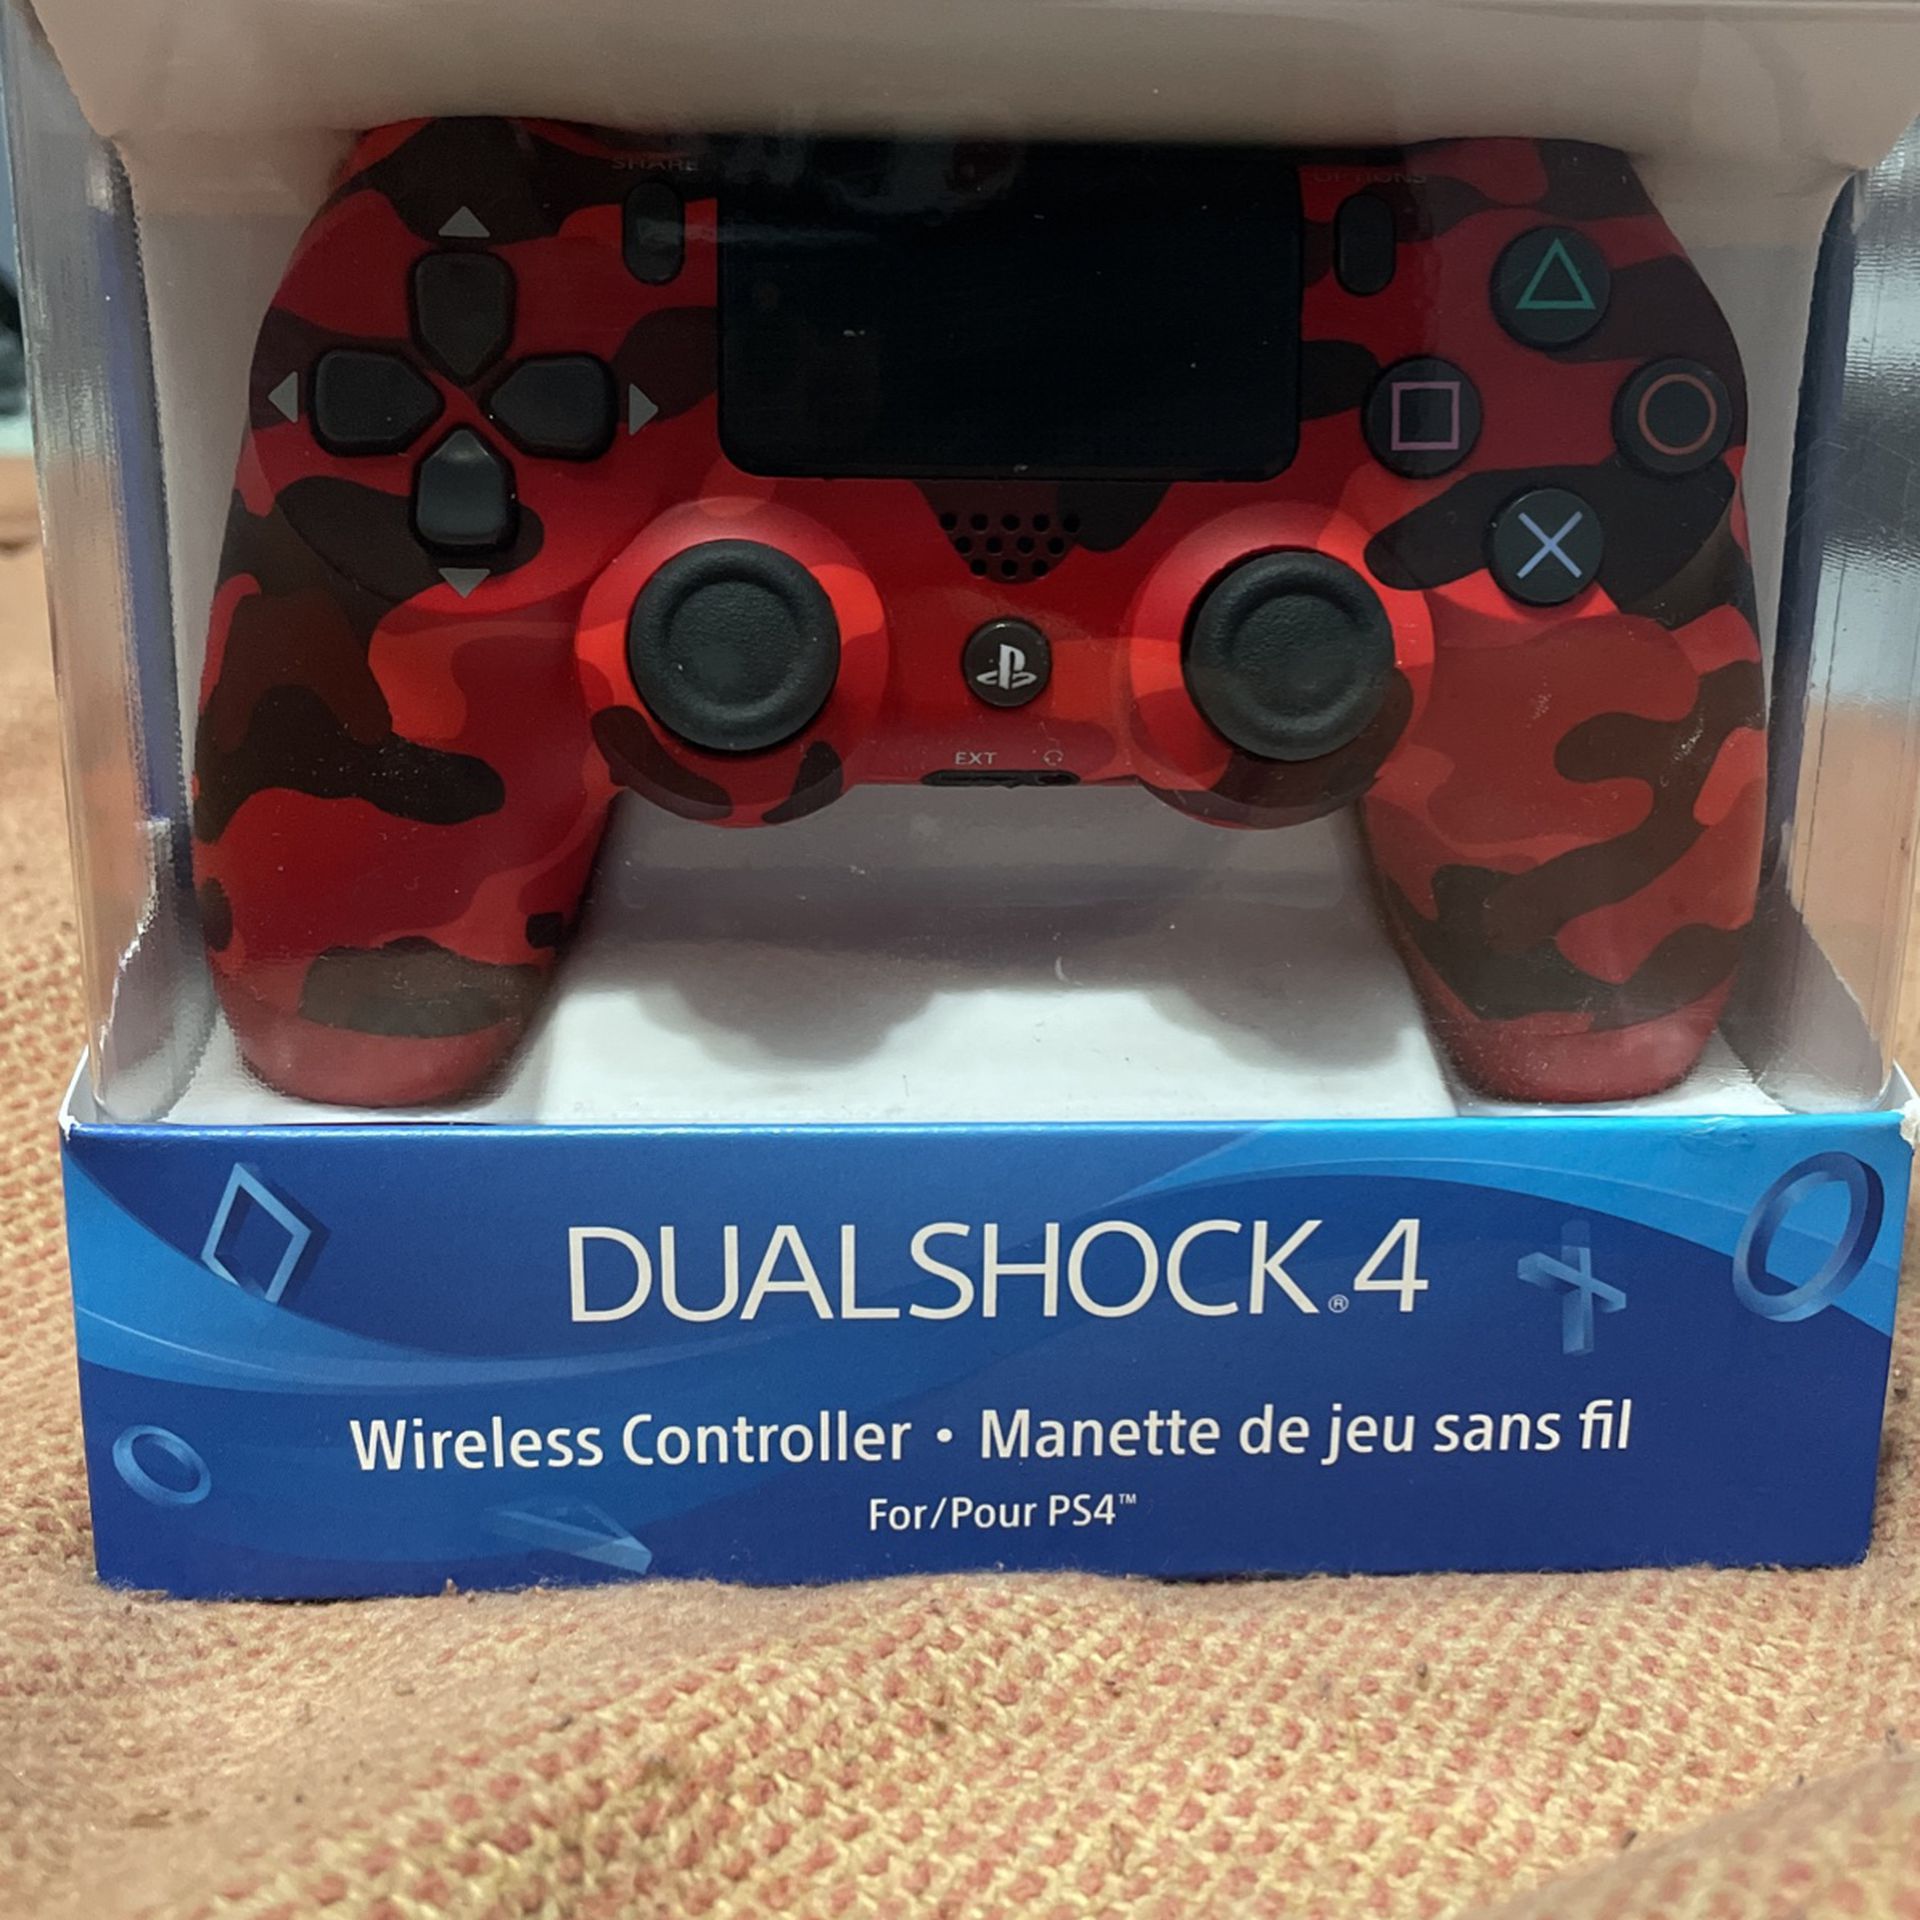 Milliard ar svale Ps4 Controller Red Camo for Sale in Aurora, IL - OfferUp